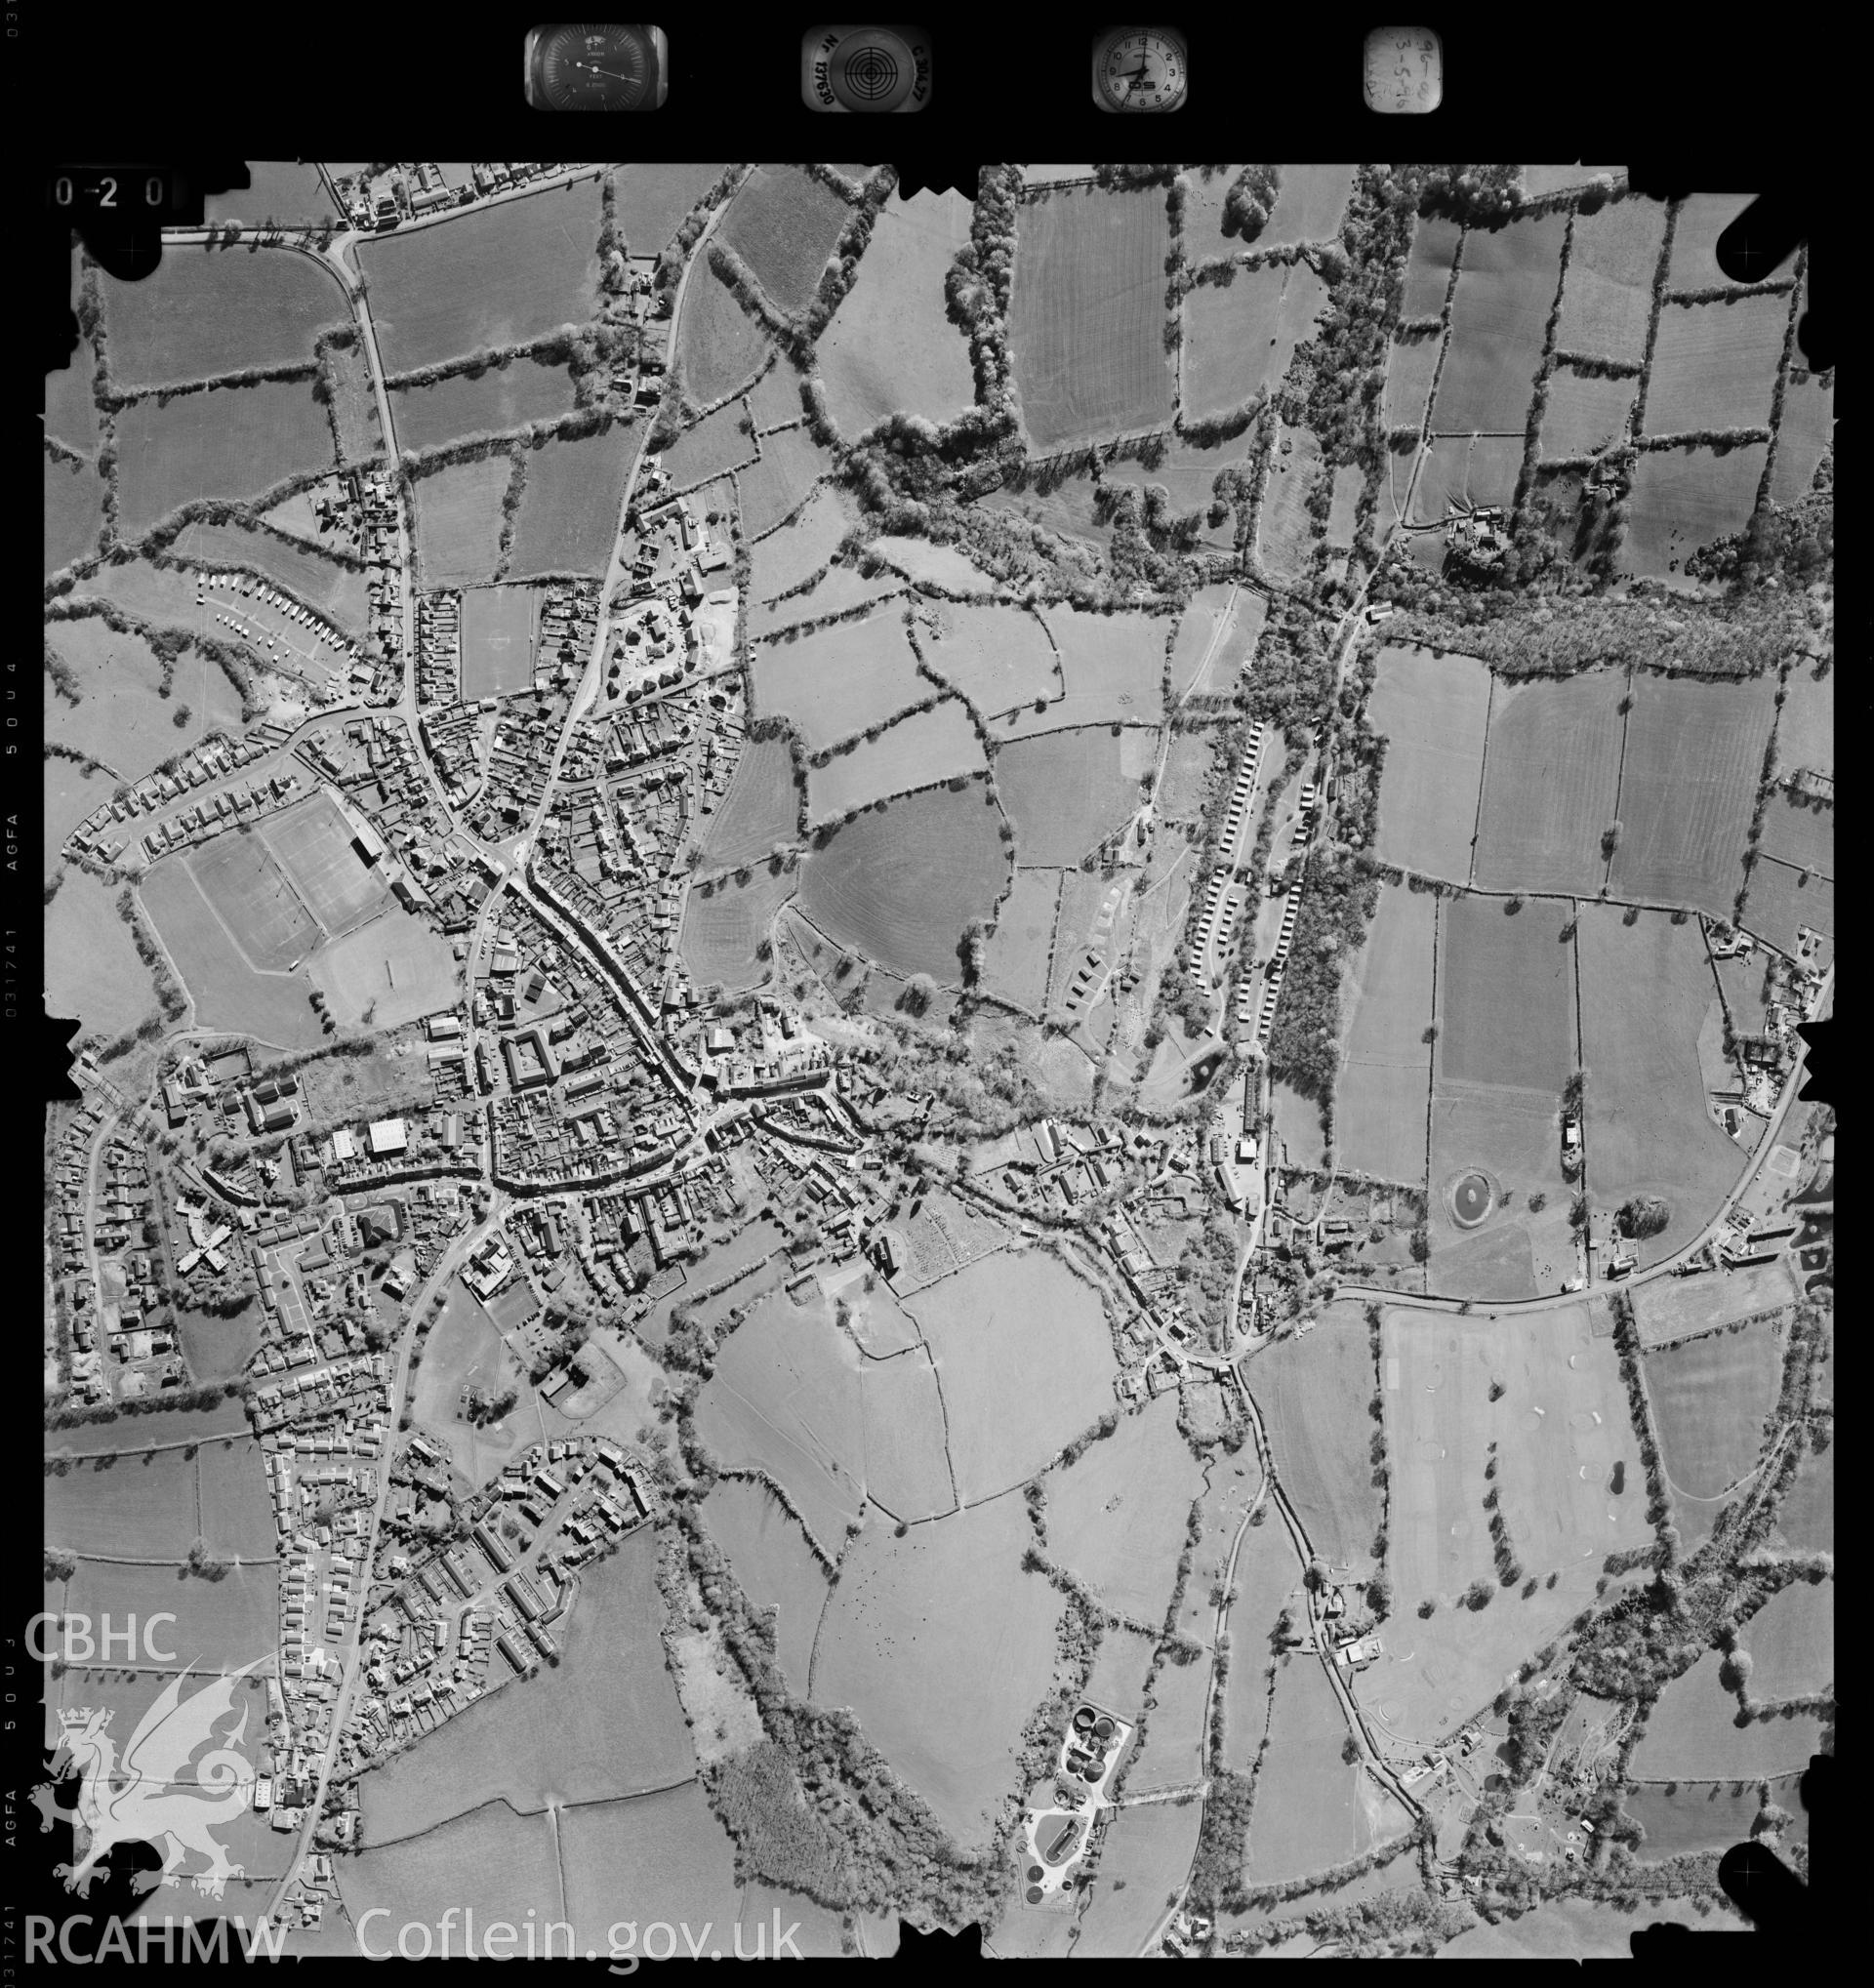 Digitized copy of an aerial photograph showing Narberth area, taken by Ordnance Survey, 1992.